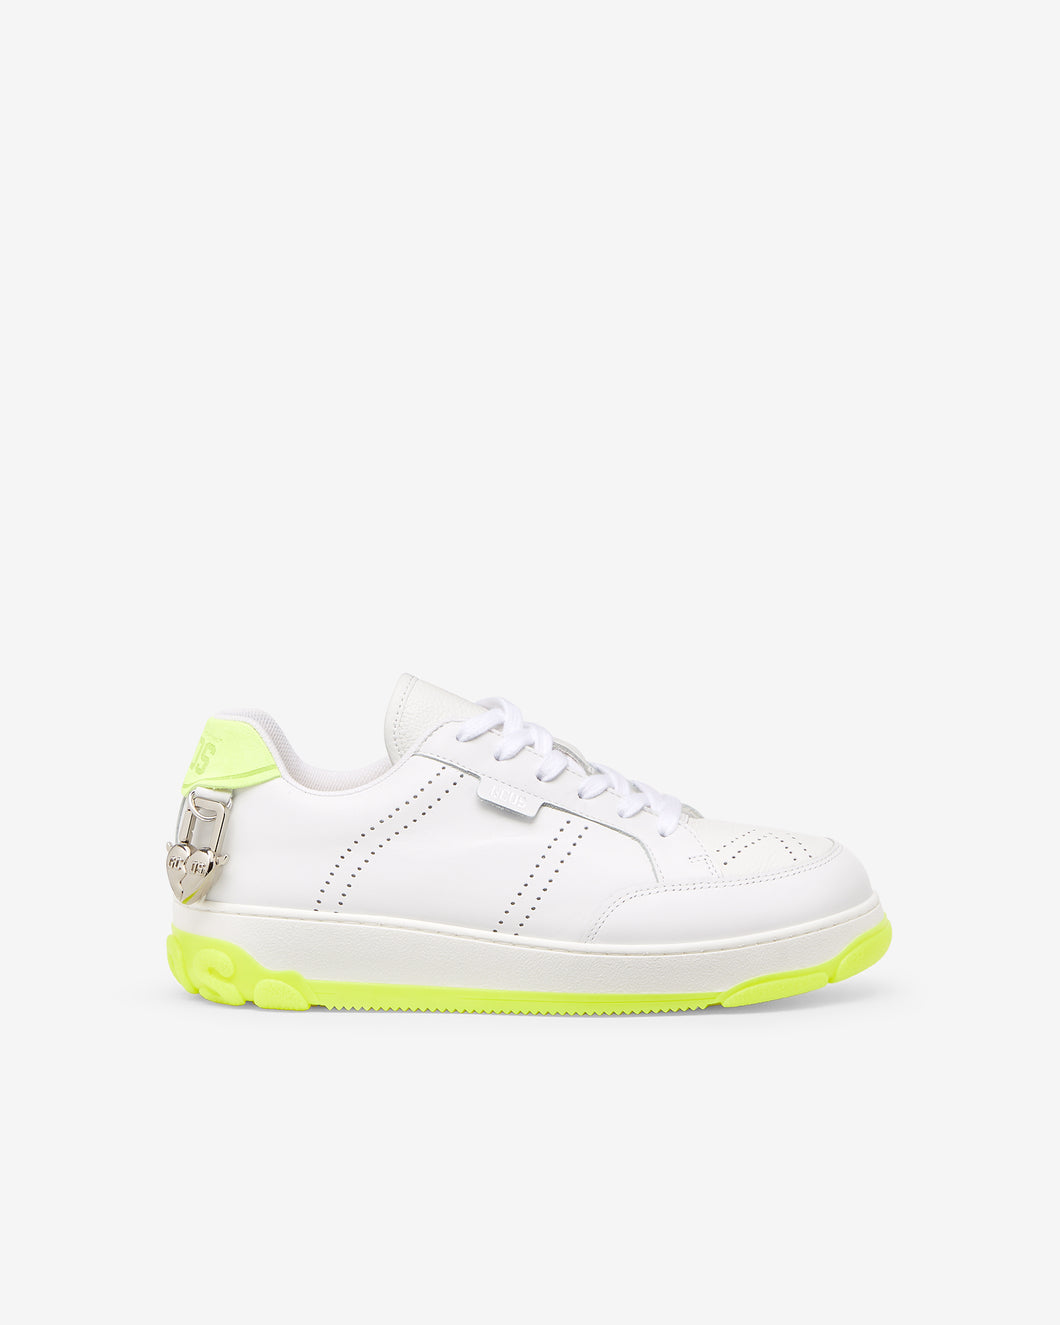 Essential Nami Sneakers : Unisex Shoes Lime | GCDS